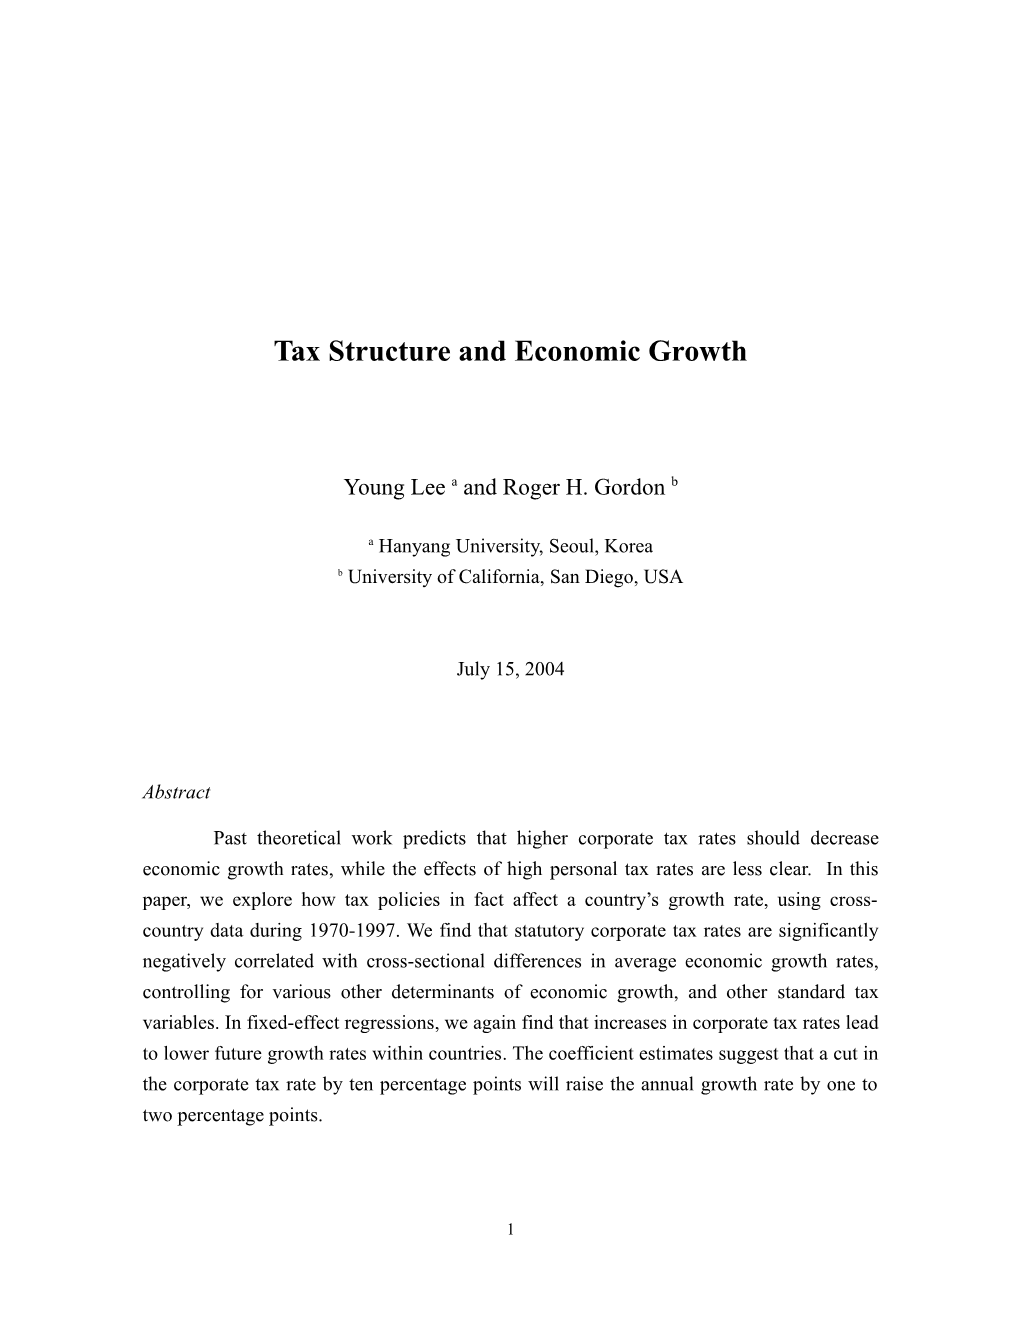 Marginal Tax Rates and Economic Growth